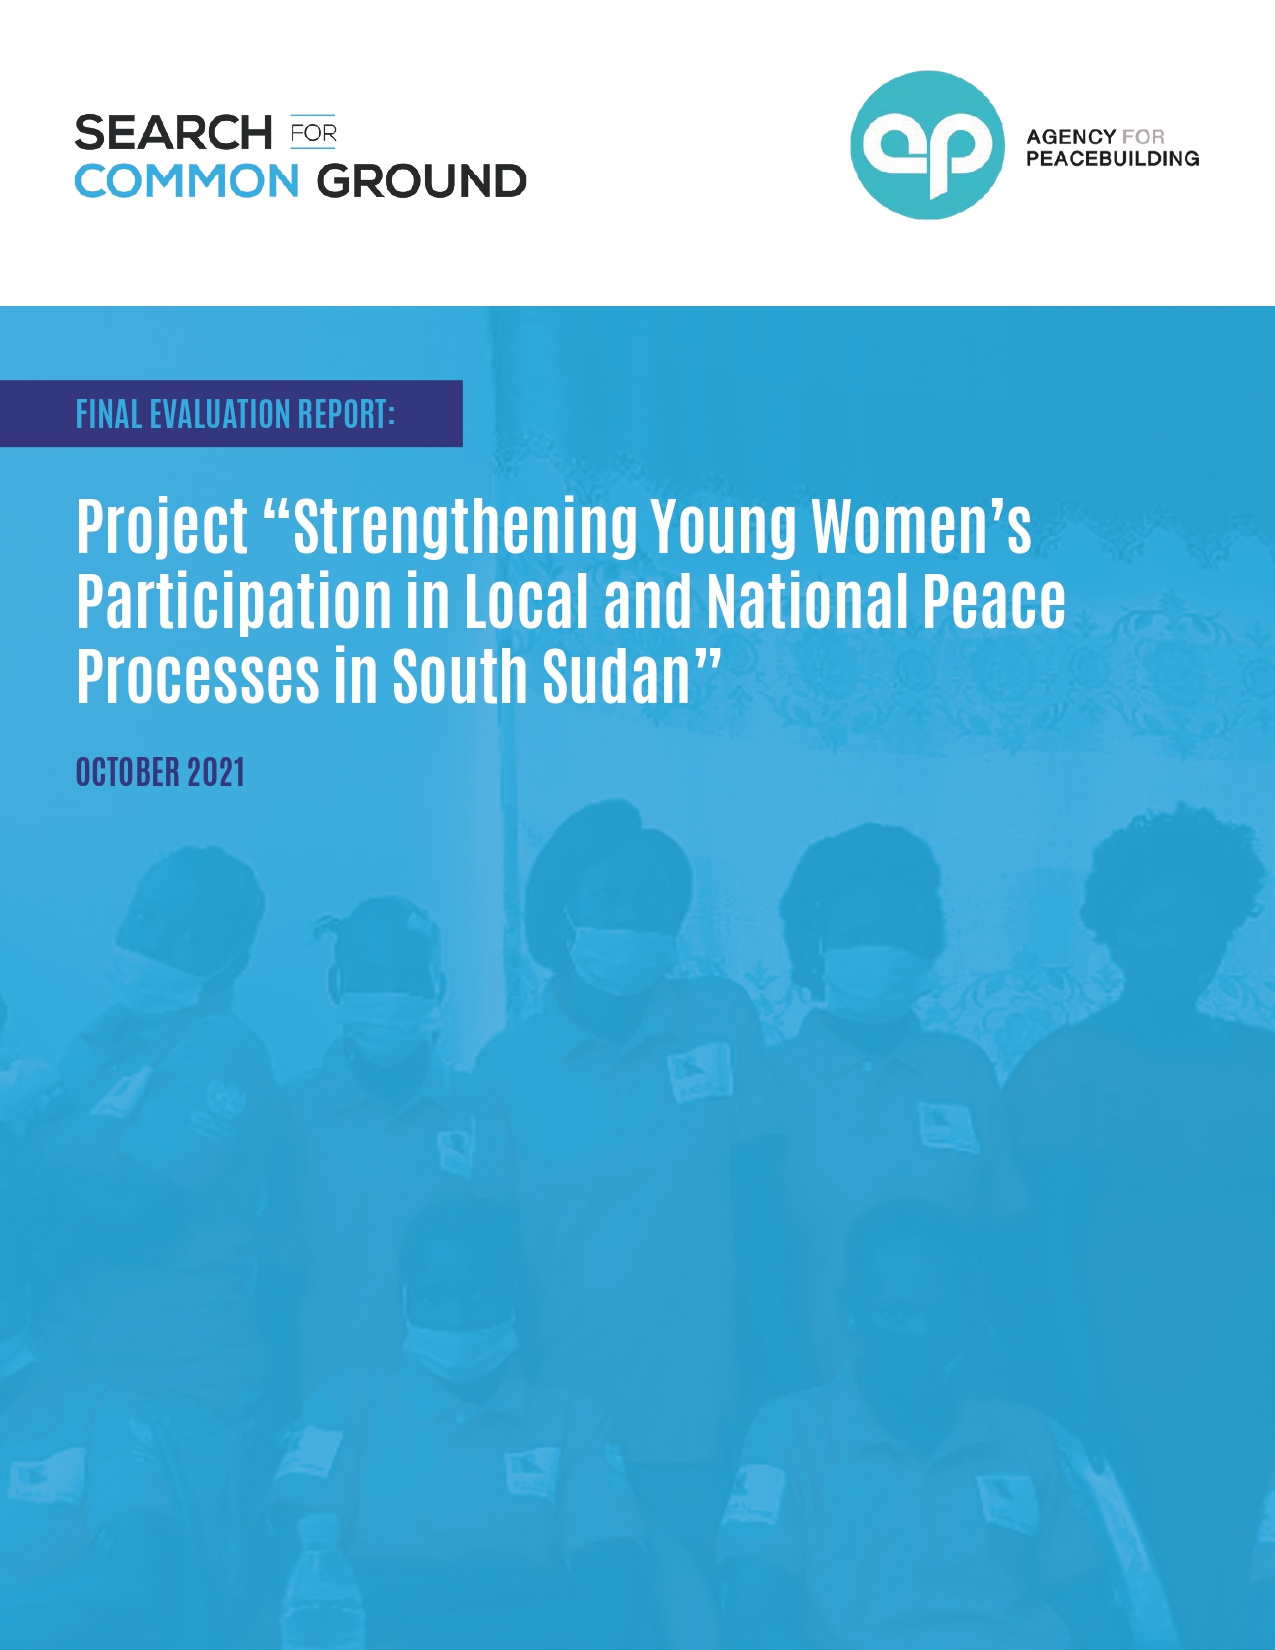 Strengthening young women’s participation in local and national peace processes in South Sudan